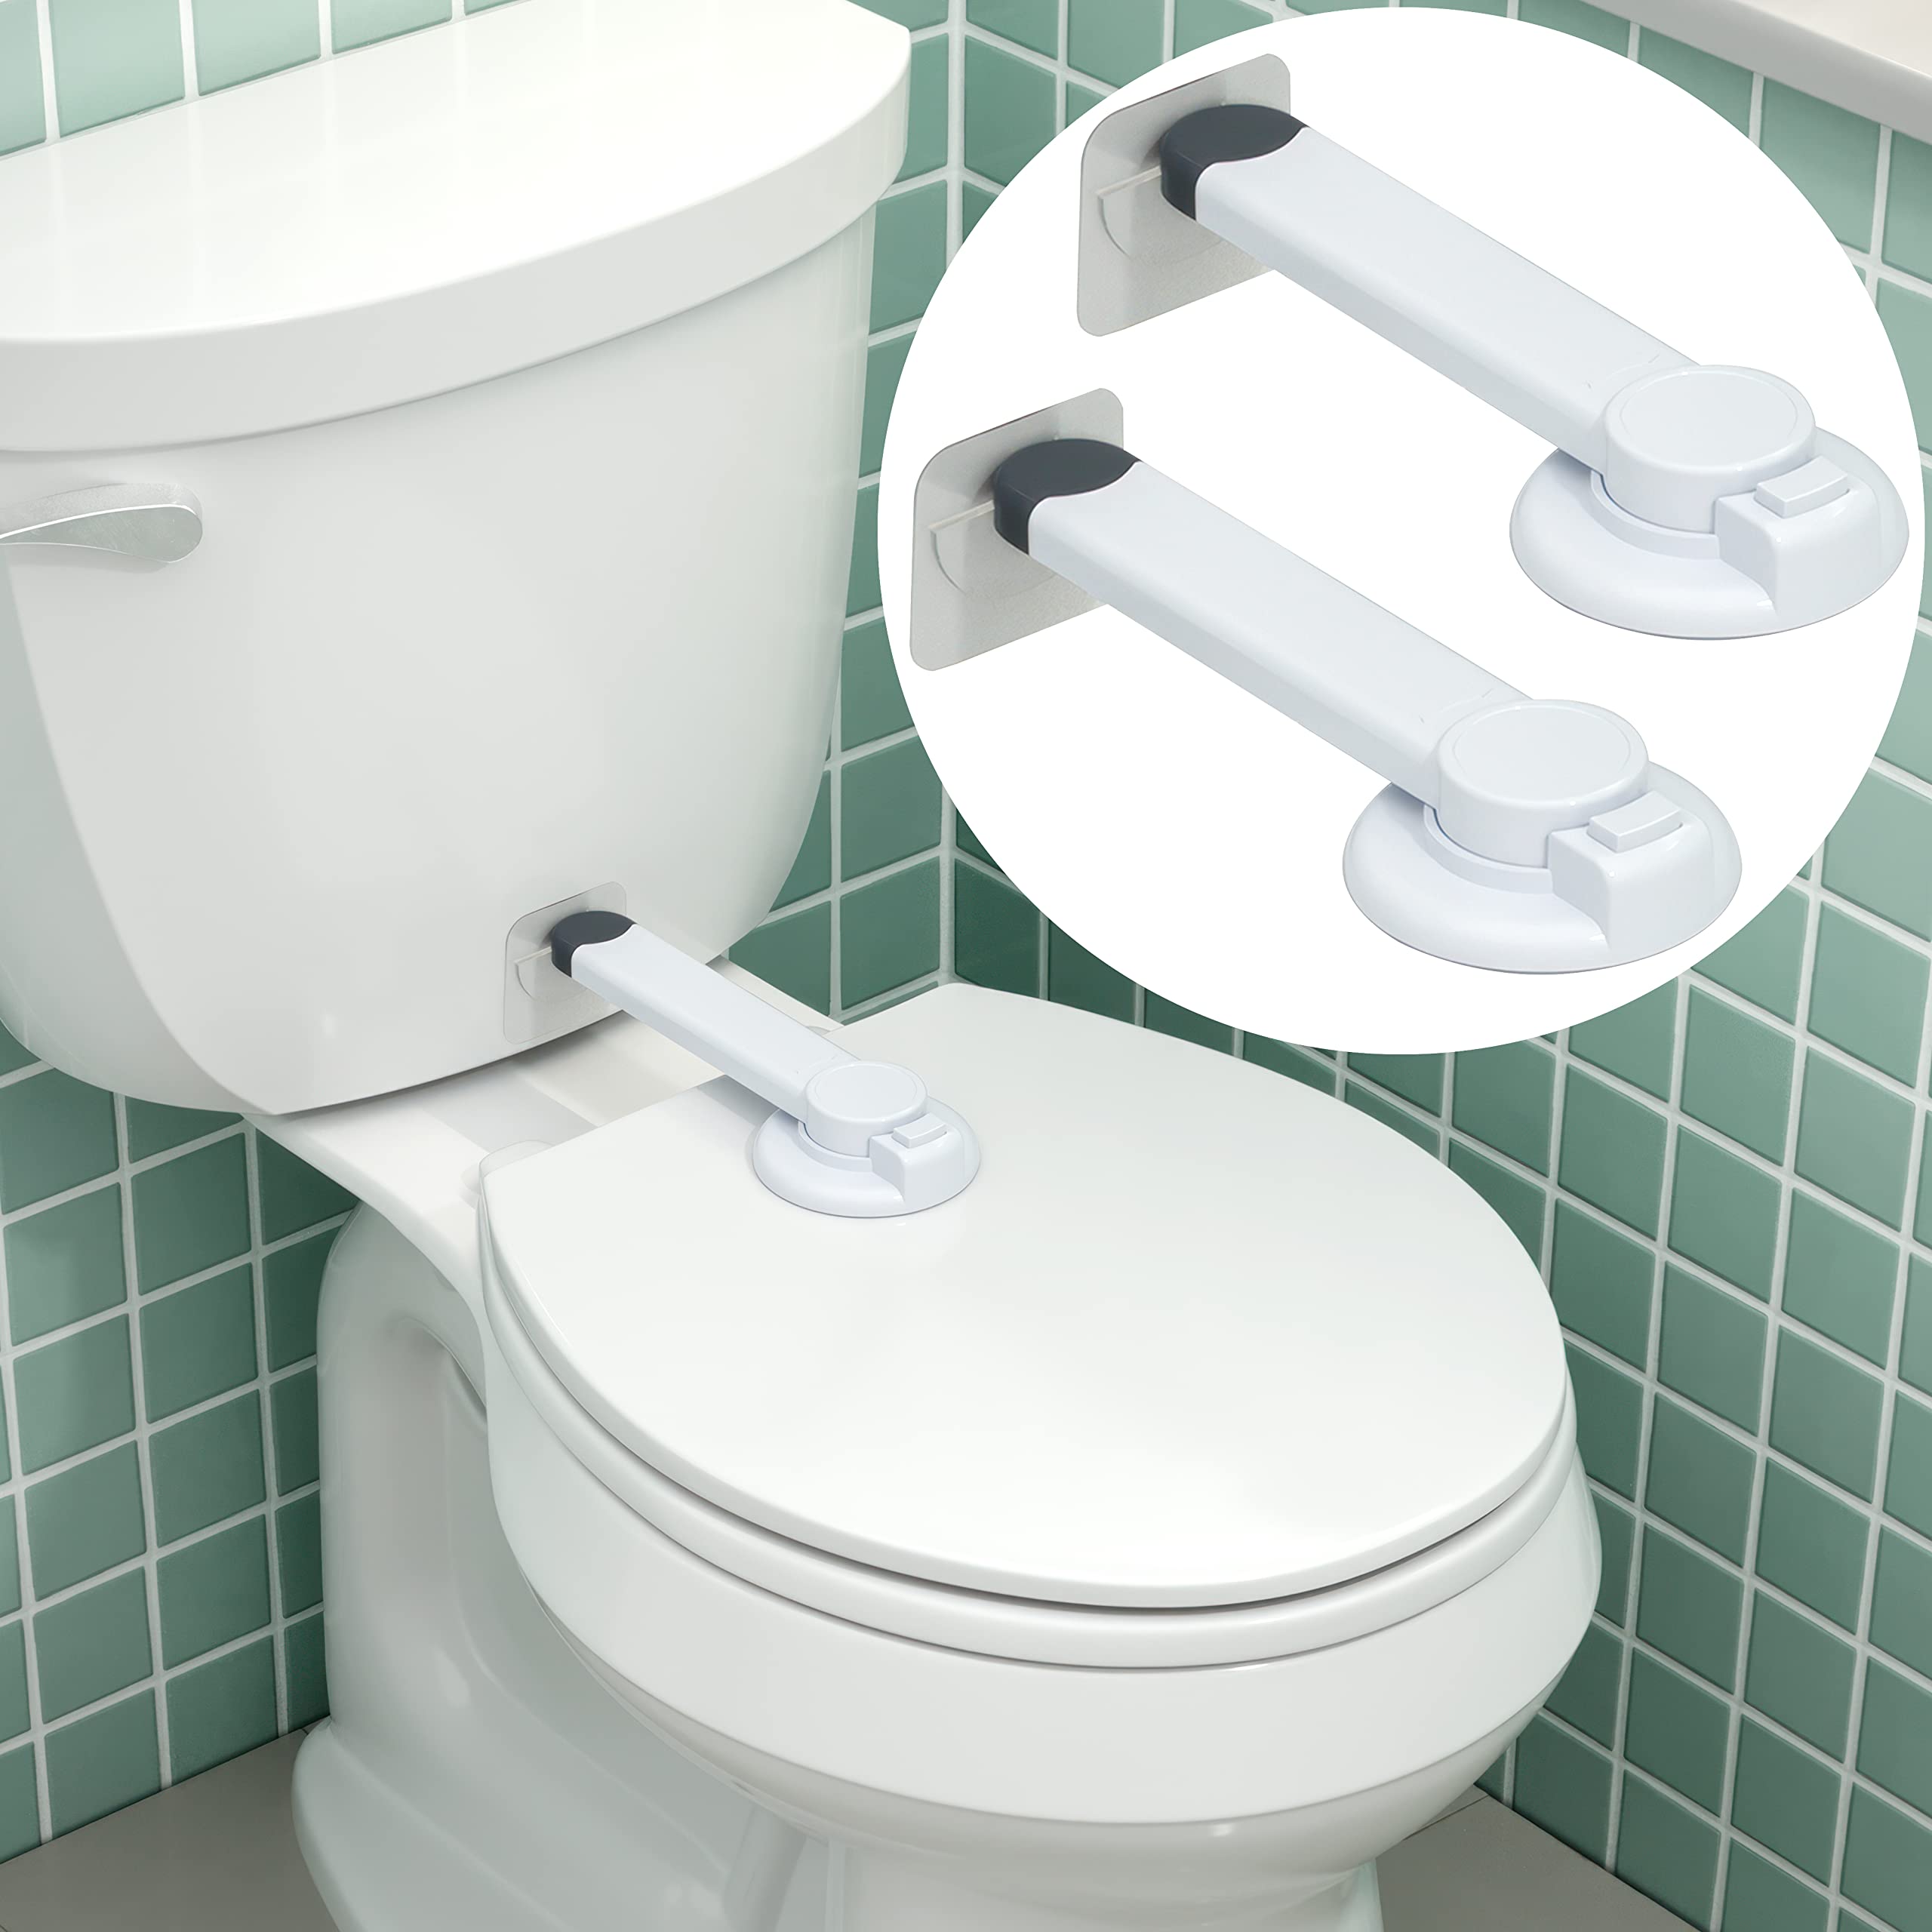 baby toilet seat lock Baby toilet lock (2 pack) ideal baby proof toilet lid lock with arm